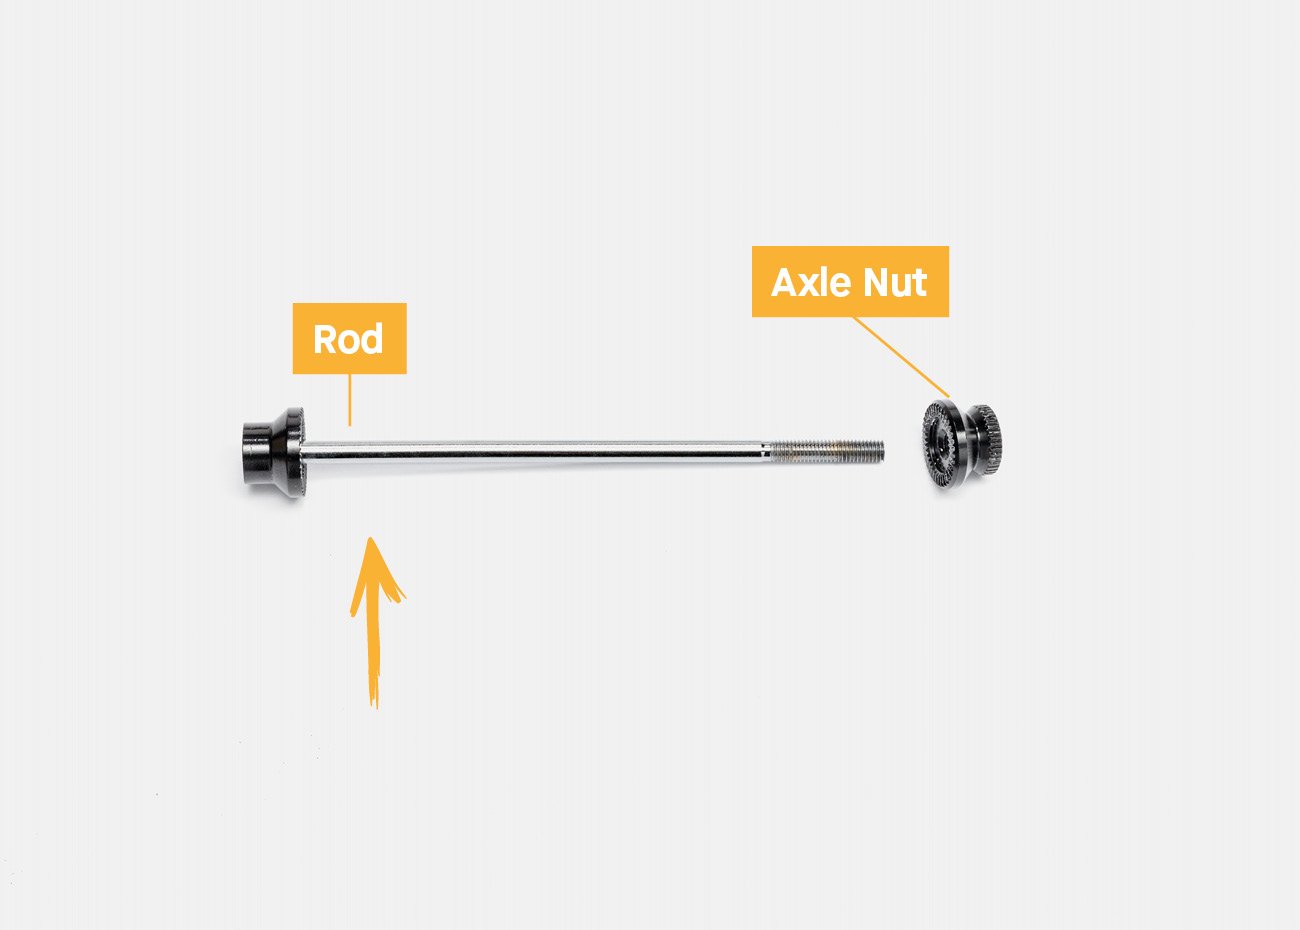 Preparing metal axle and nut for at home electric bike build